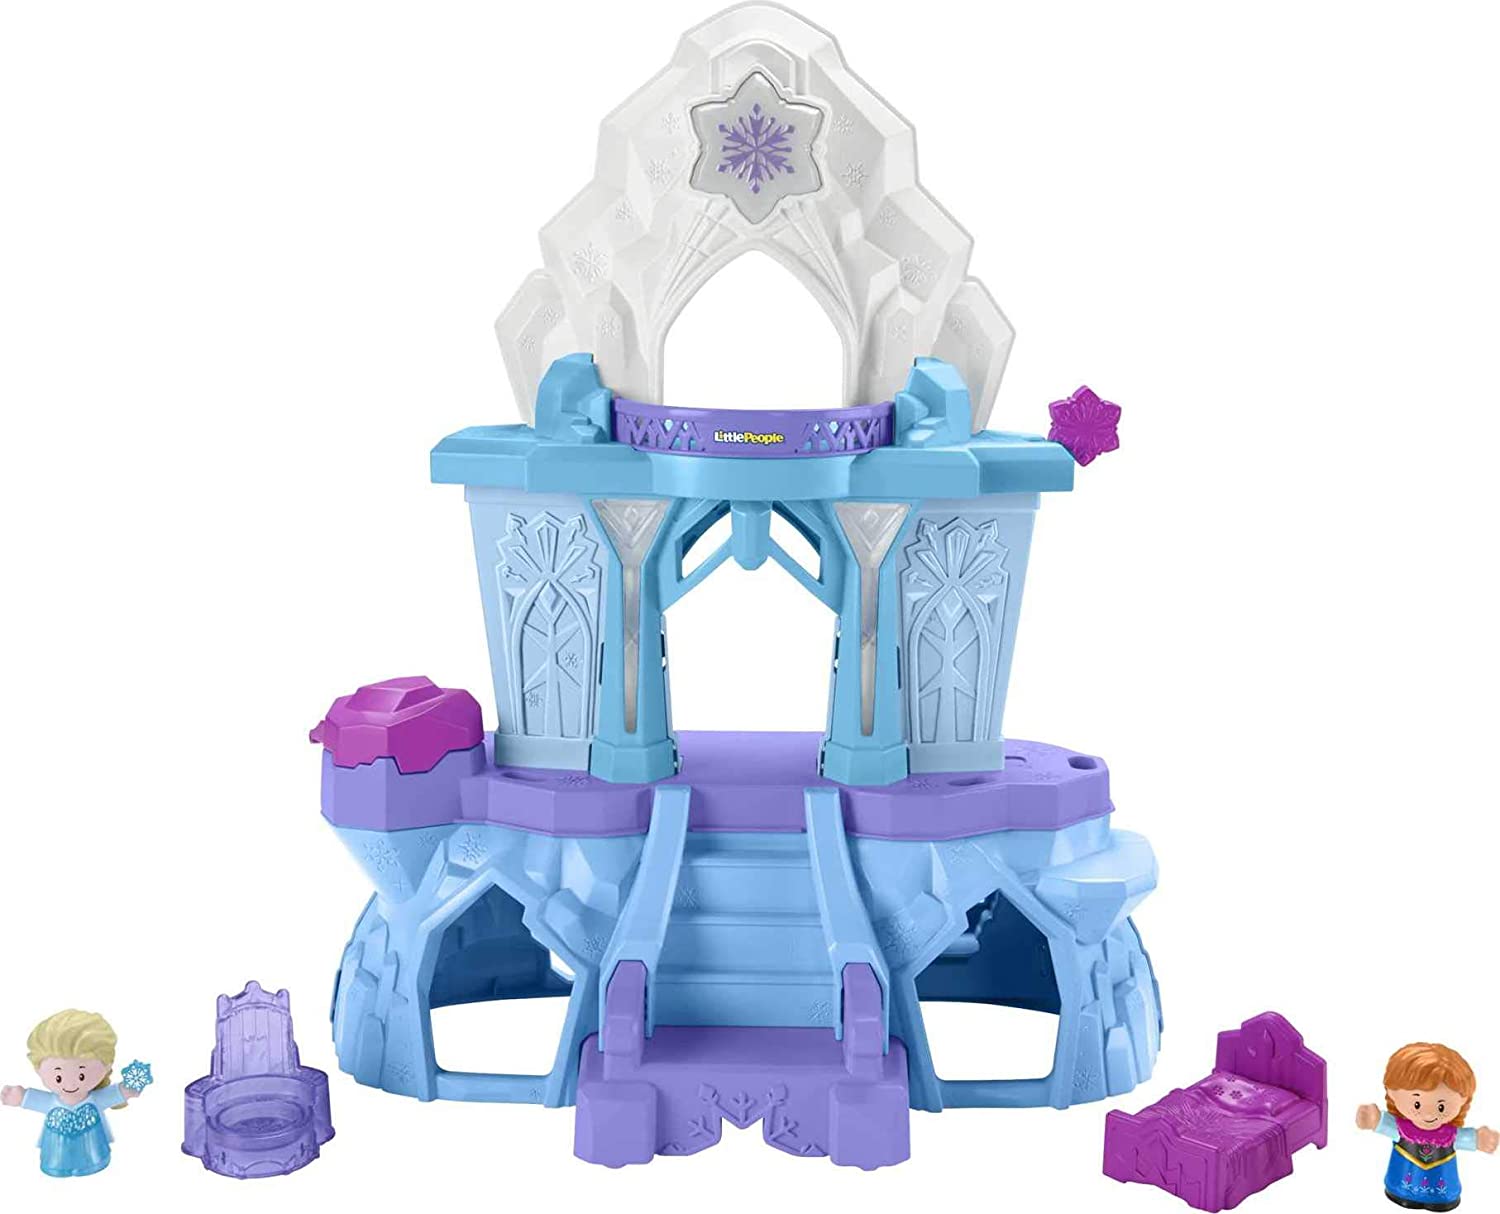 Fisher-Price Little People – Disney Frozen Elsa’s Enchanted Lights Palace Musical Playset w/Anna - Elsa  $29.30 + Free Ship